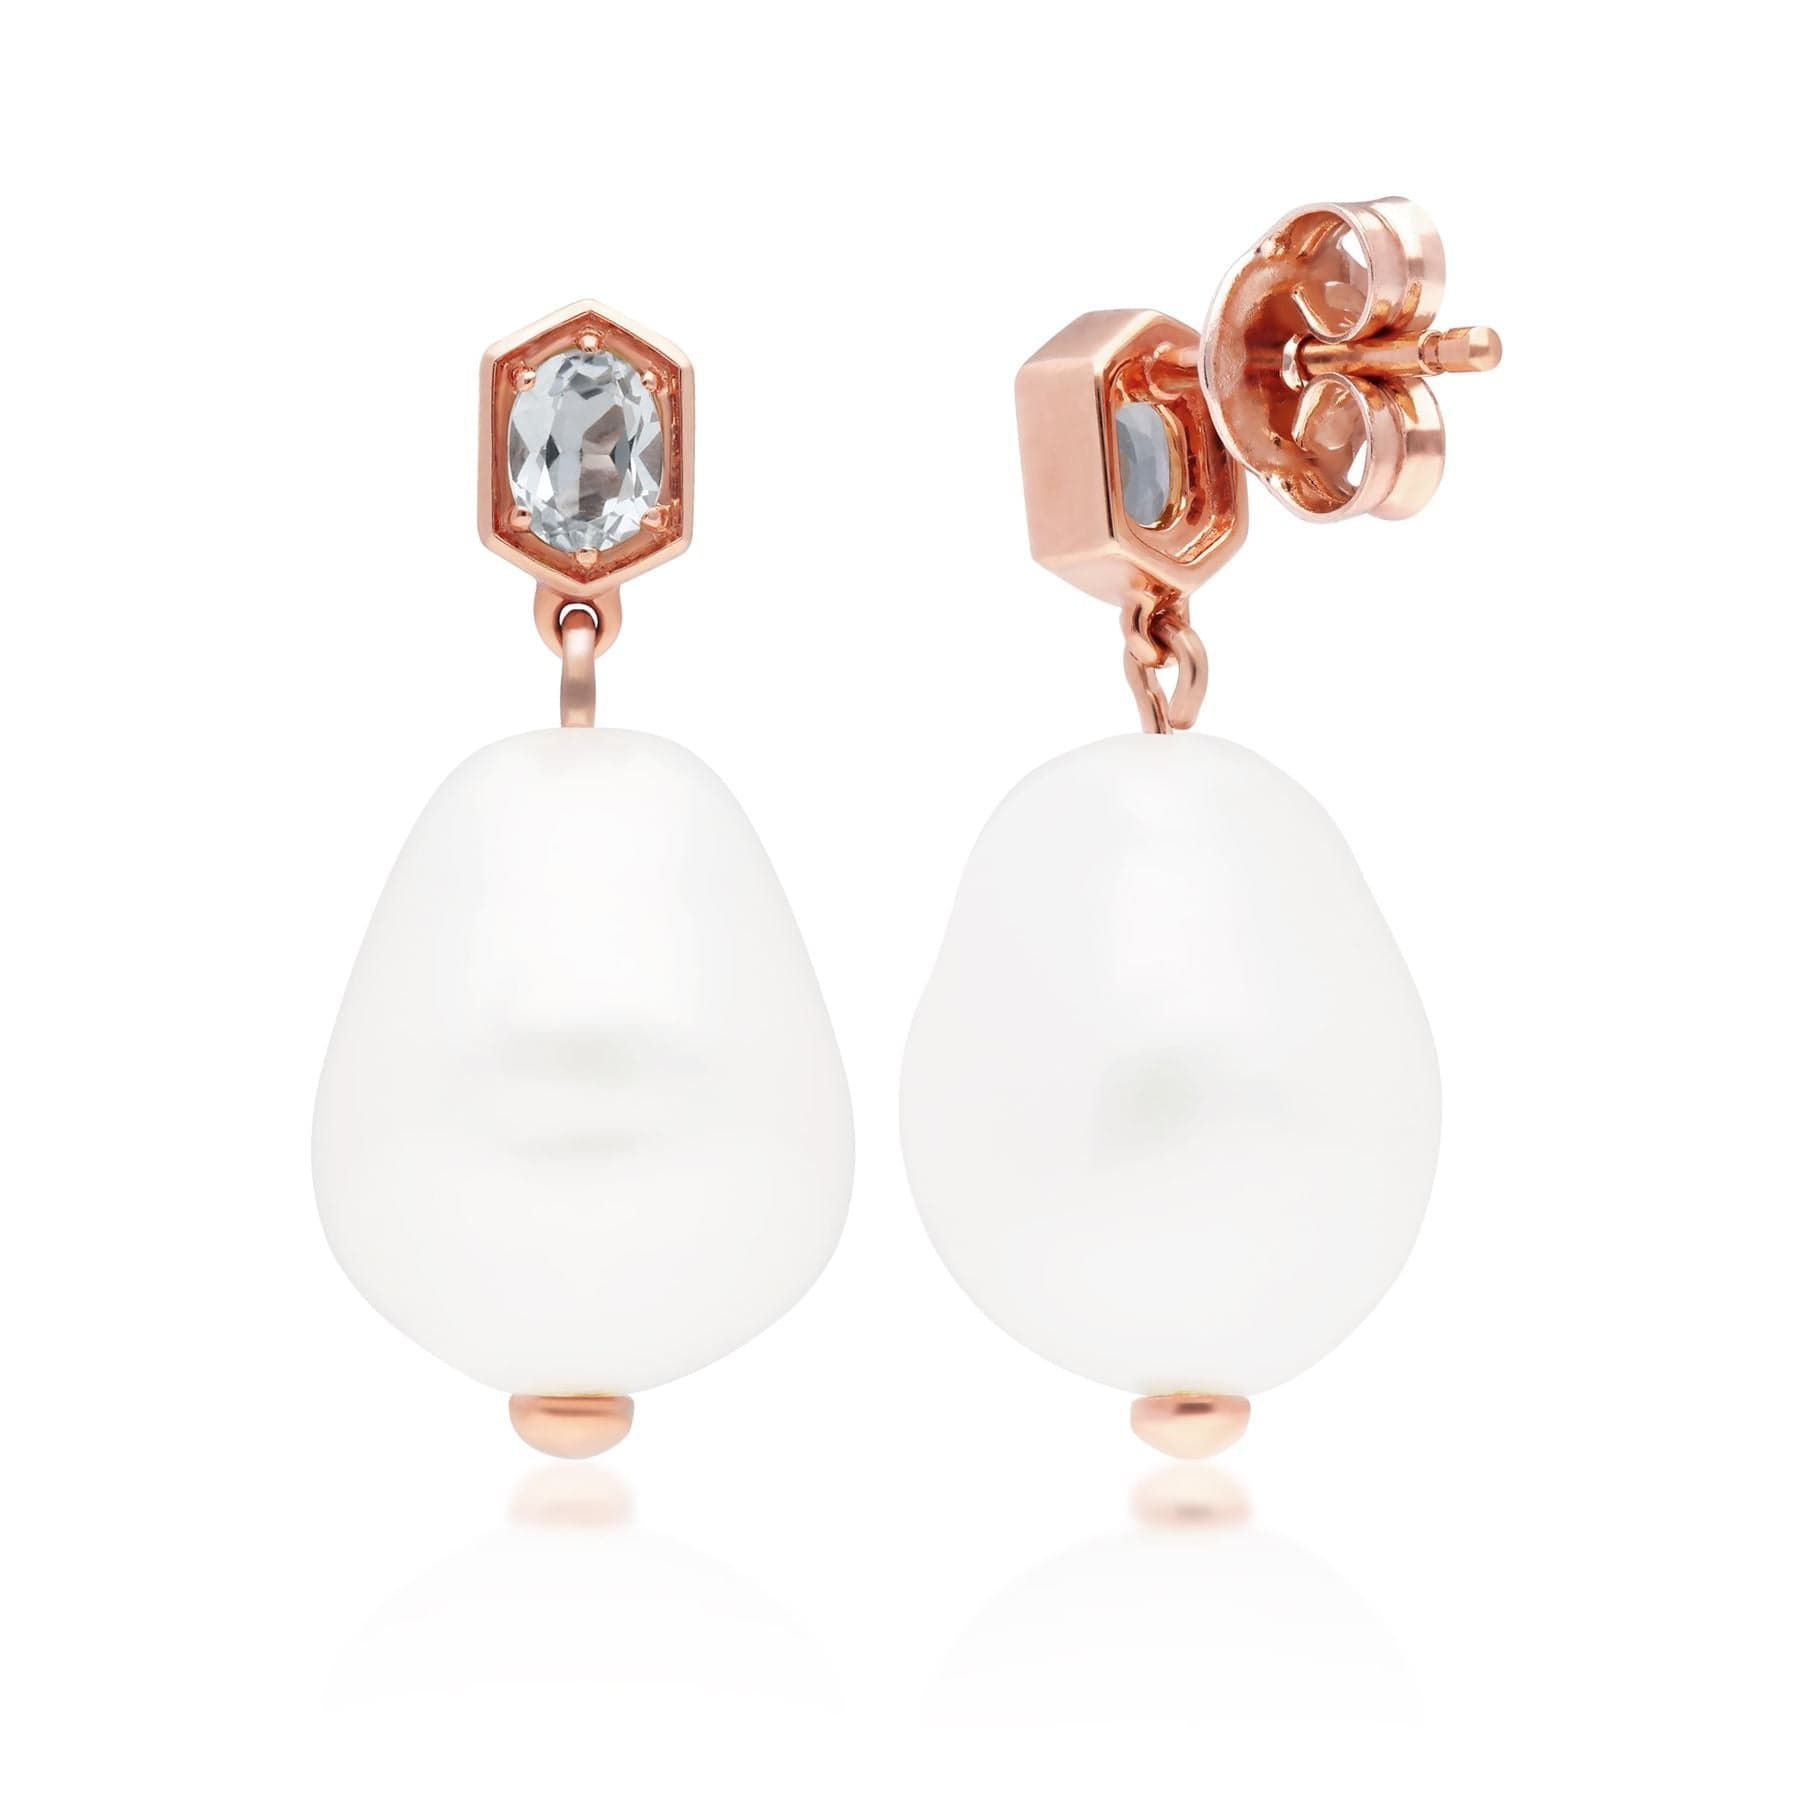 Modern Baroque Pearl & Aquamarine Drop Earrings in Rose Gold Plated Sterling Silver